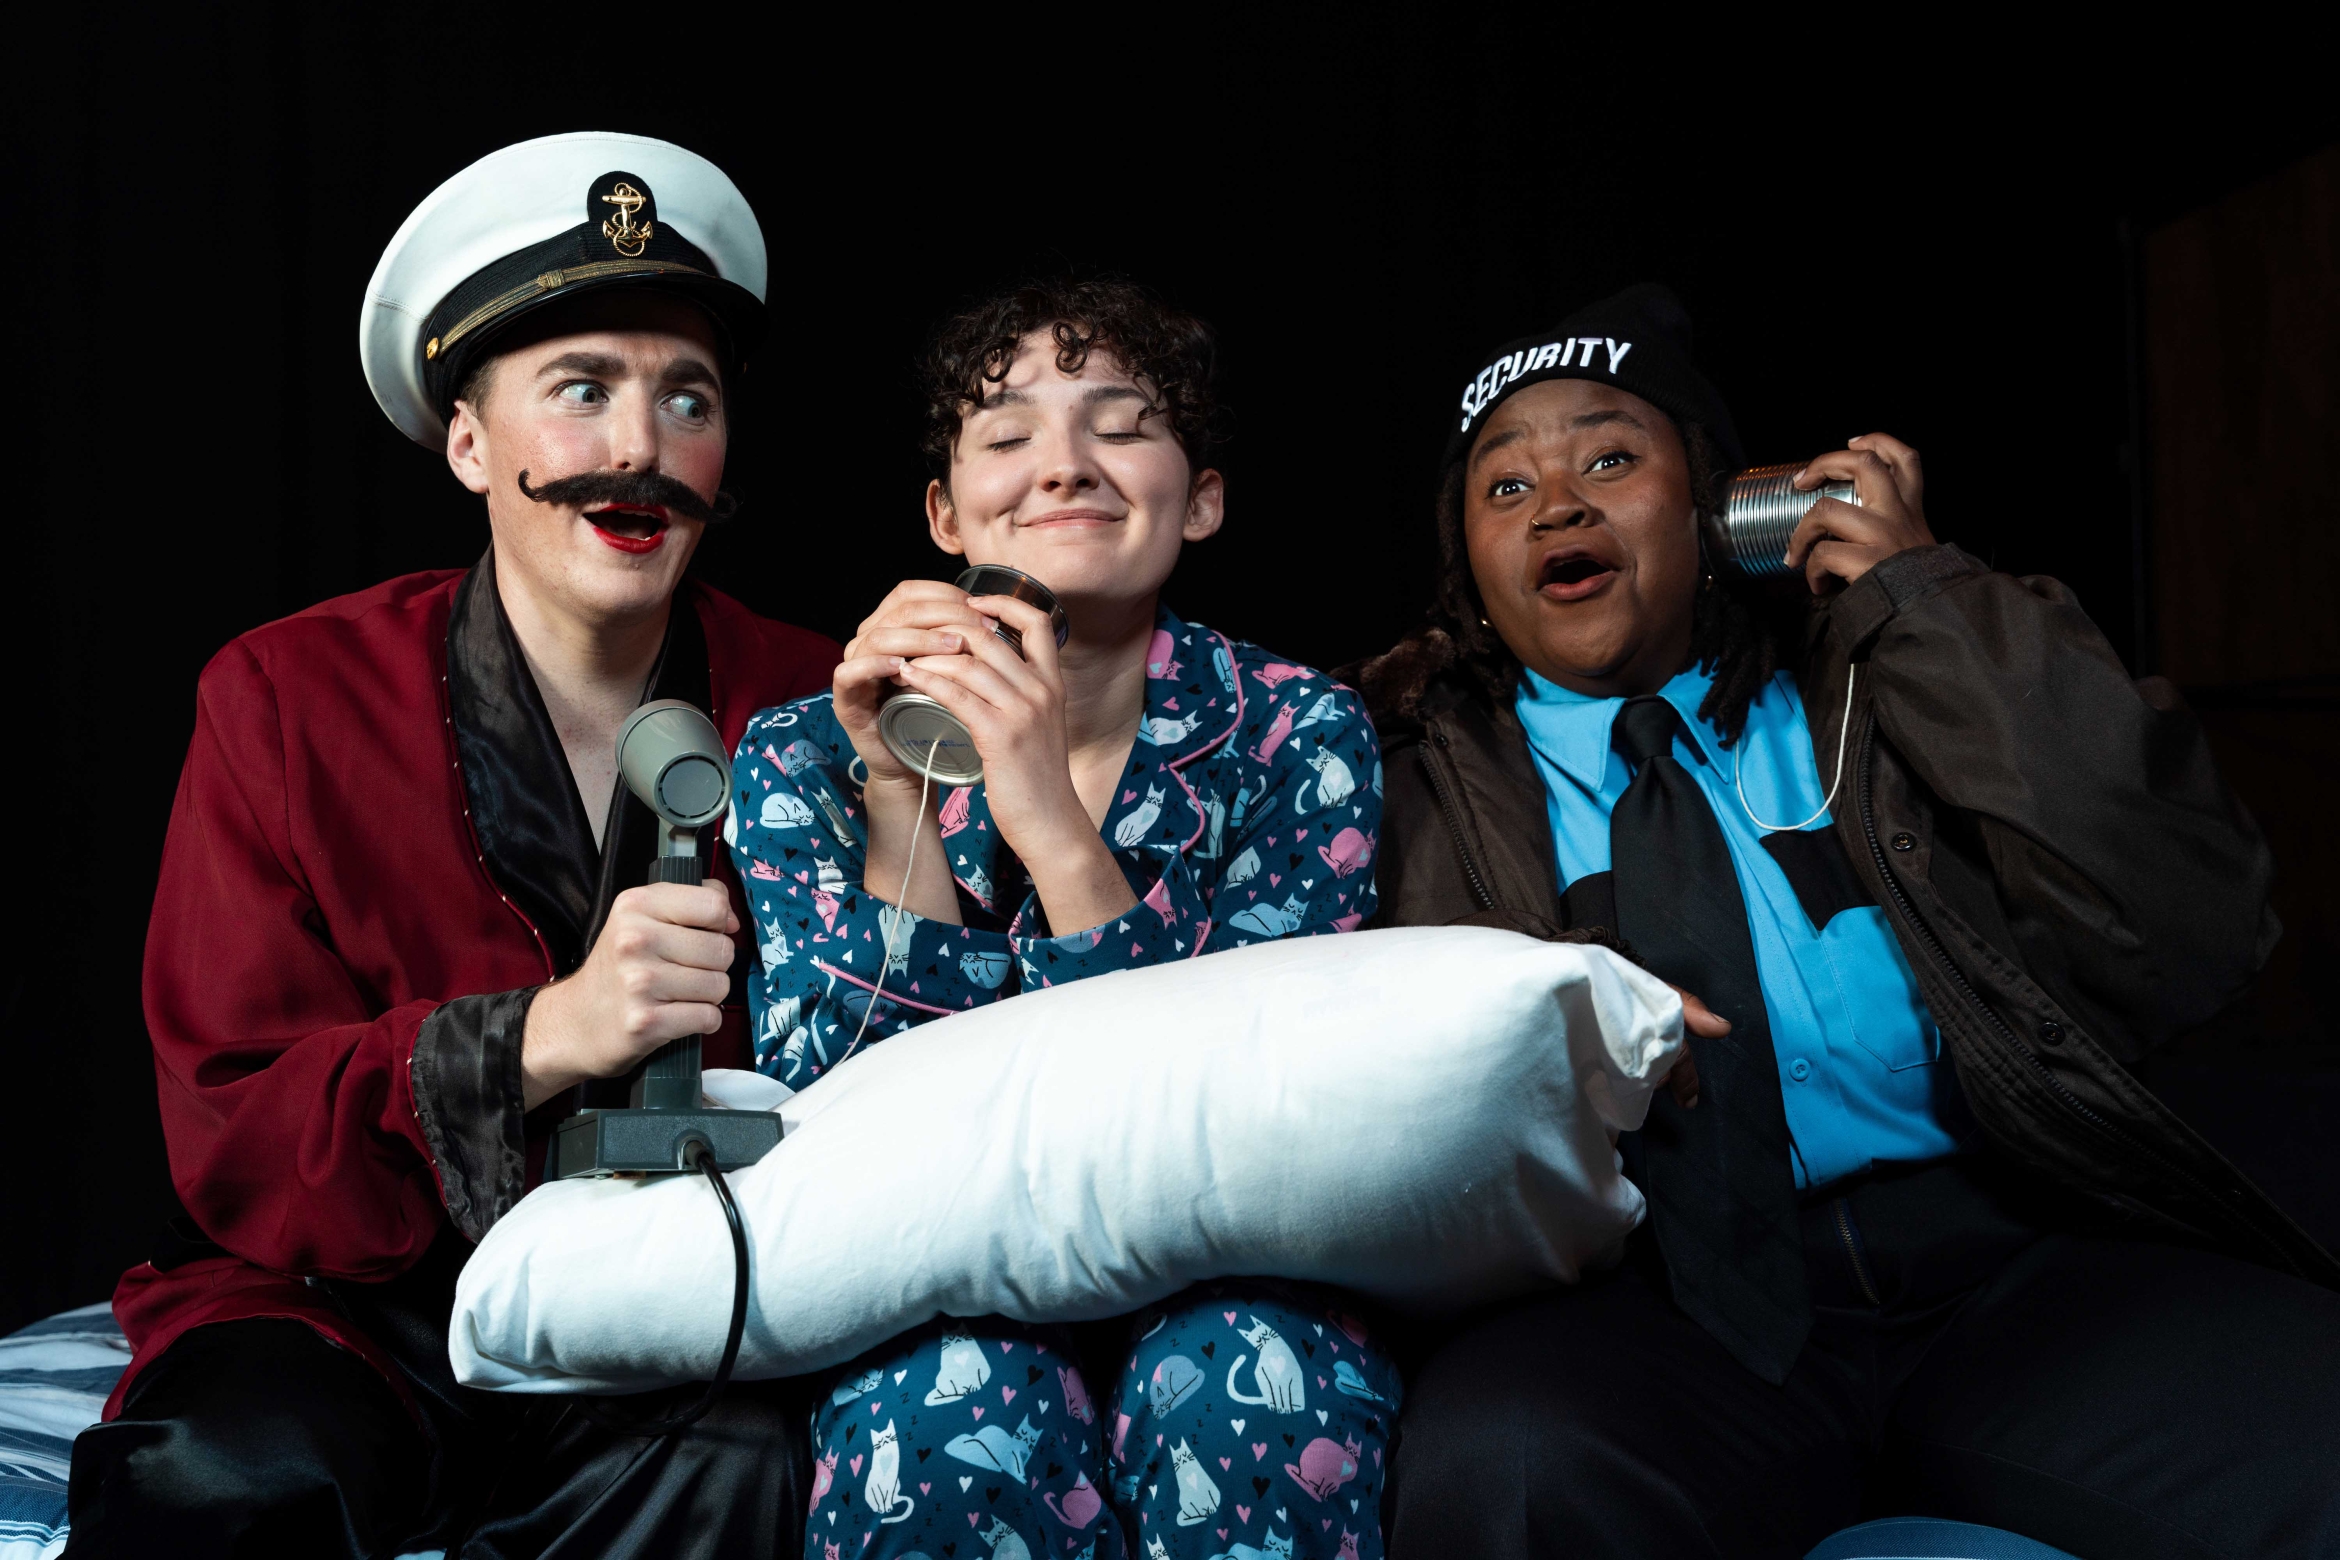 Three actors on stage, one in a sea captain's hat, one in pajamas, one dressed as a security guard